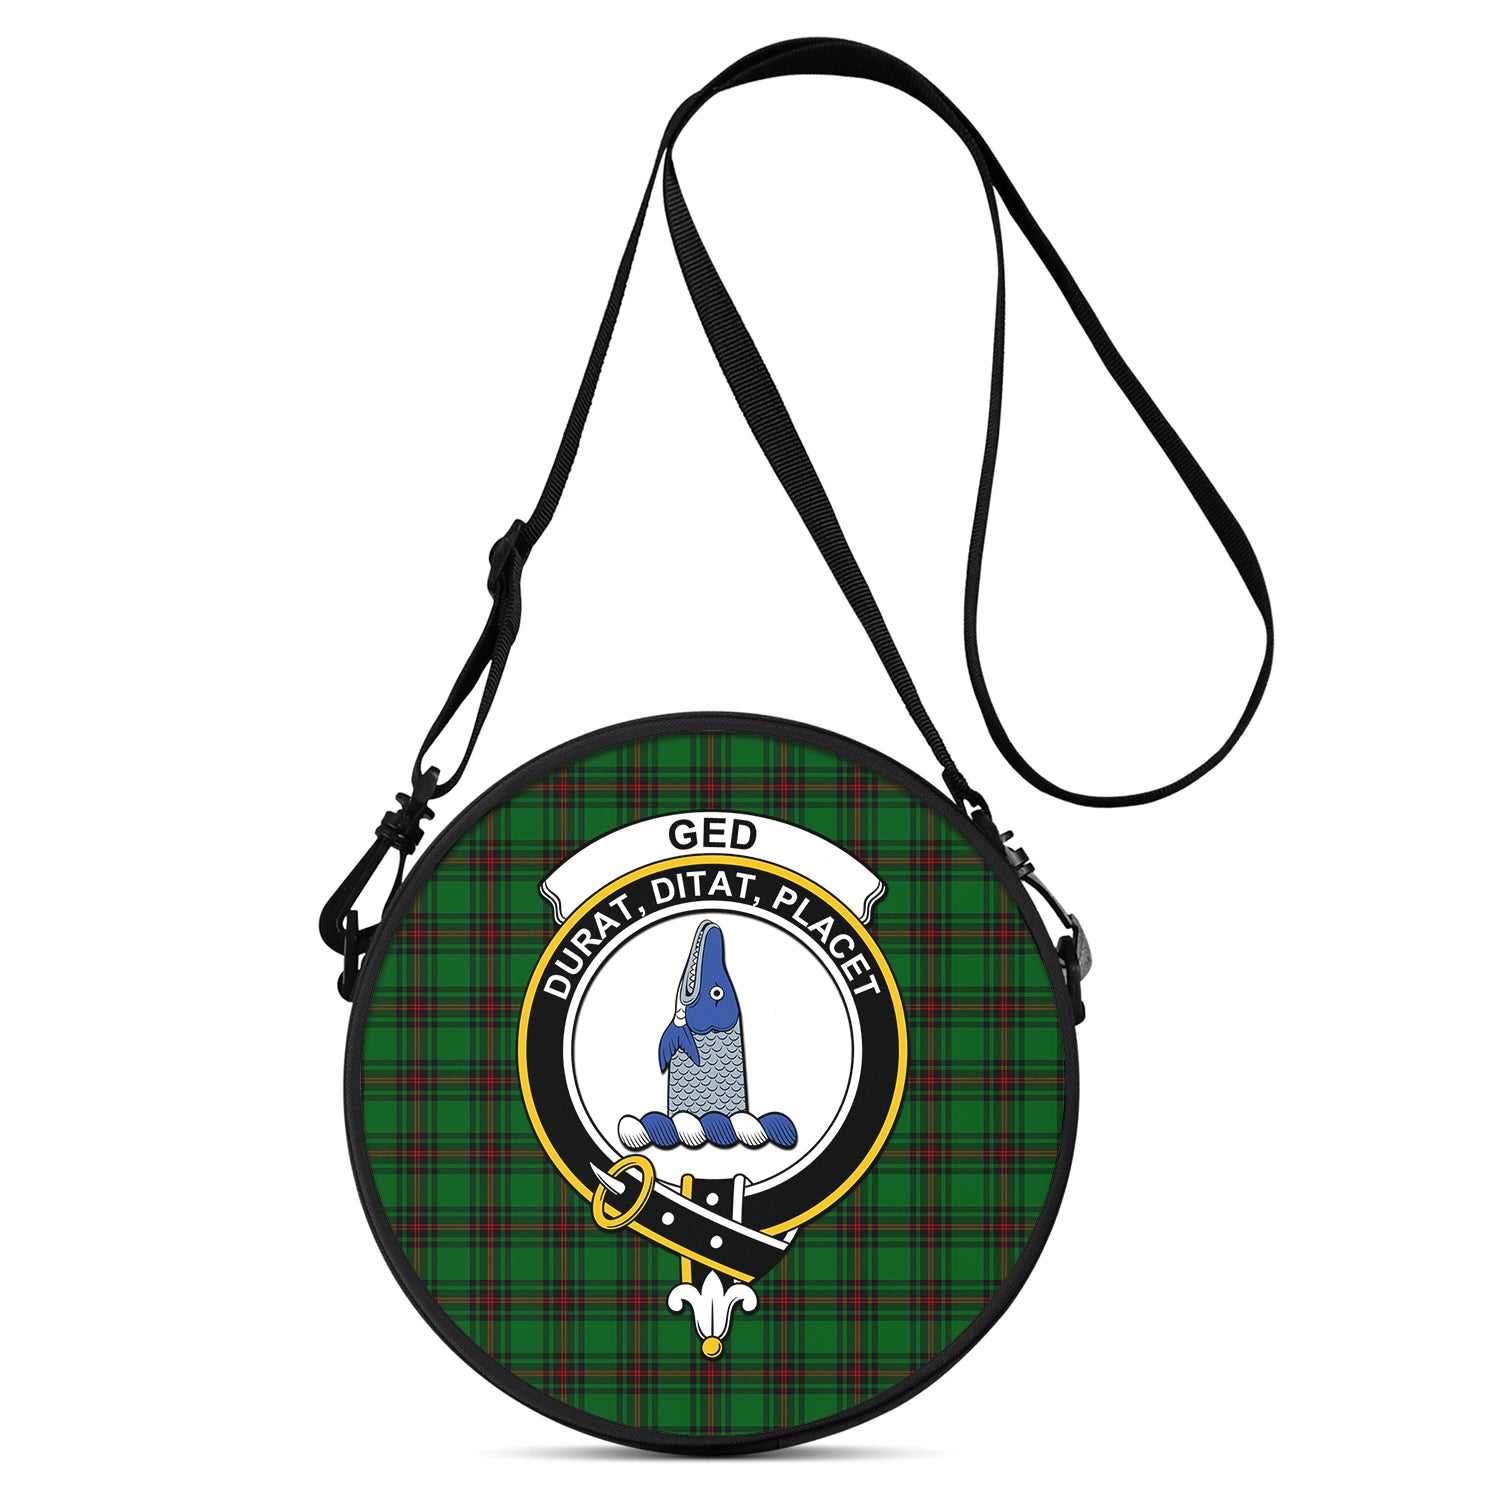 ged-tartan-round-satchel-bags-with-family-crest